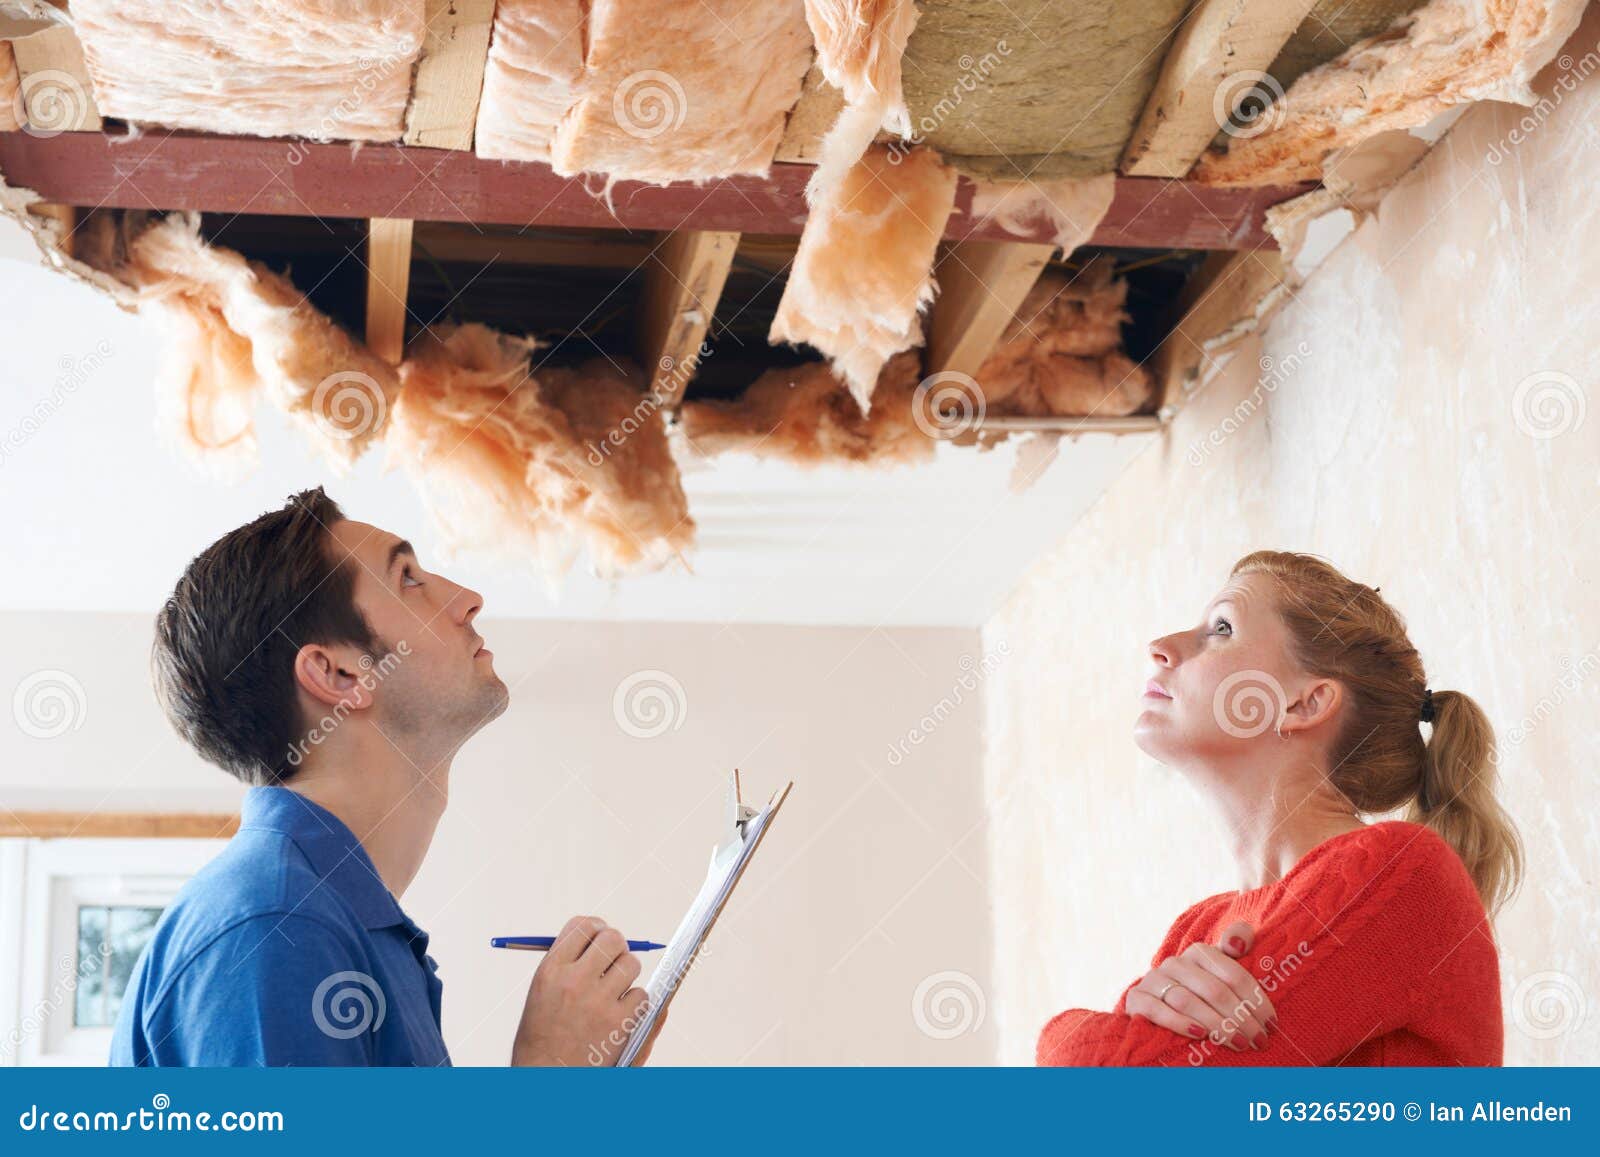 builder and client inspecting roof damage